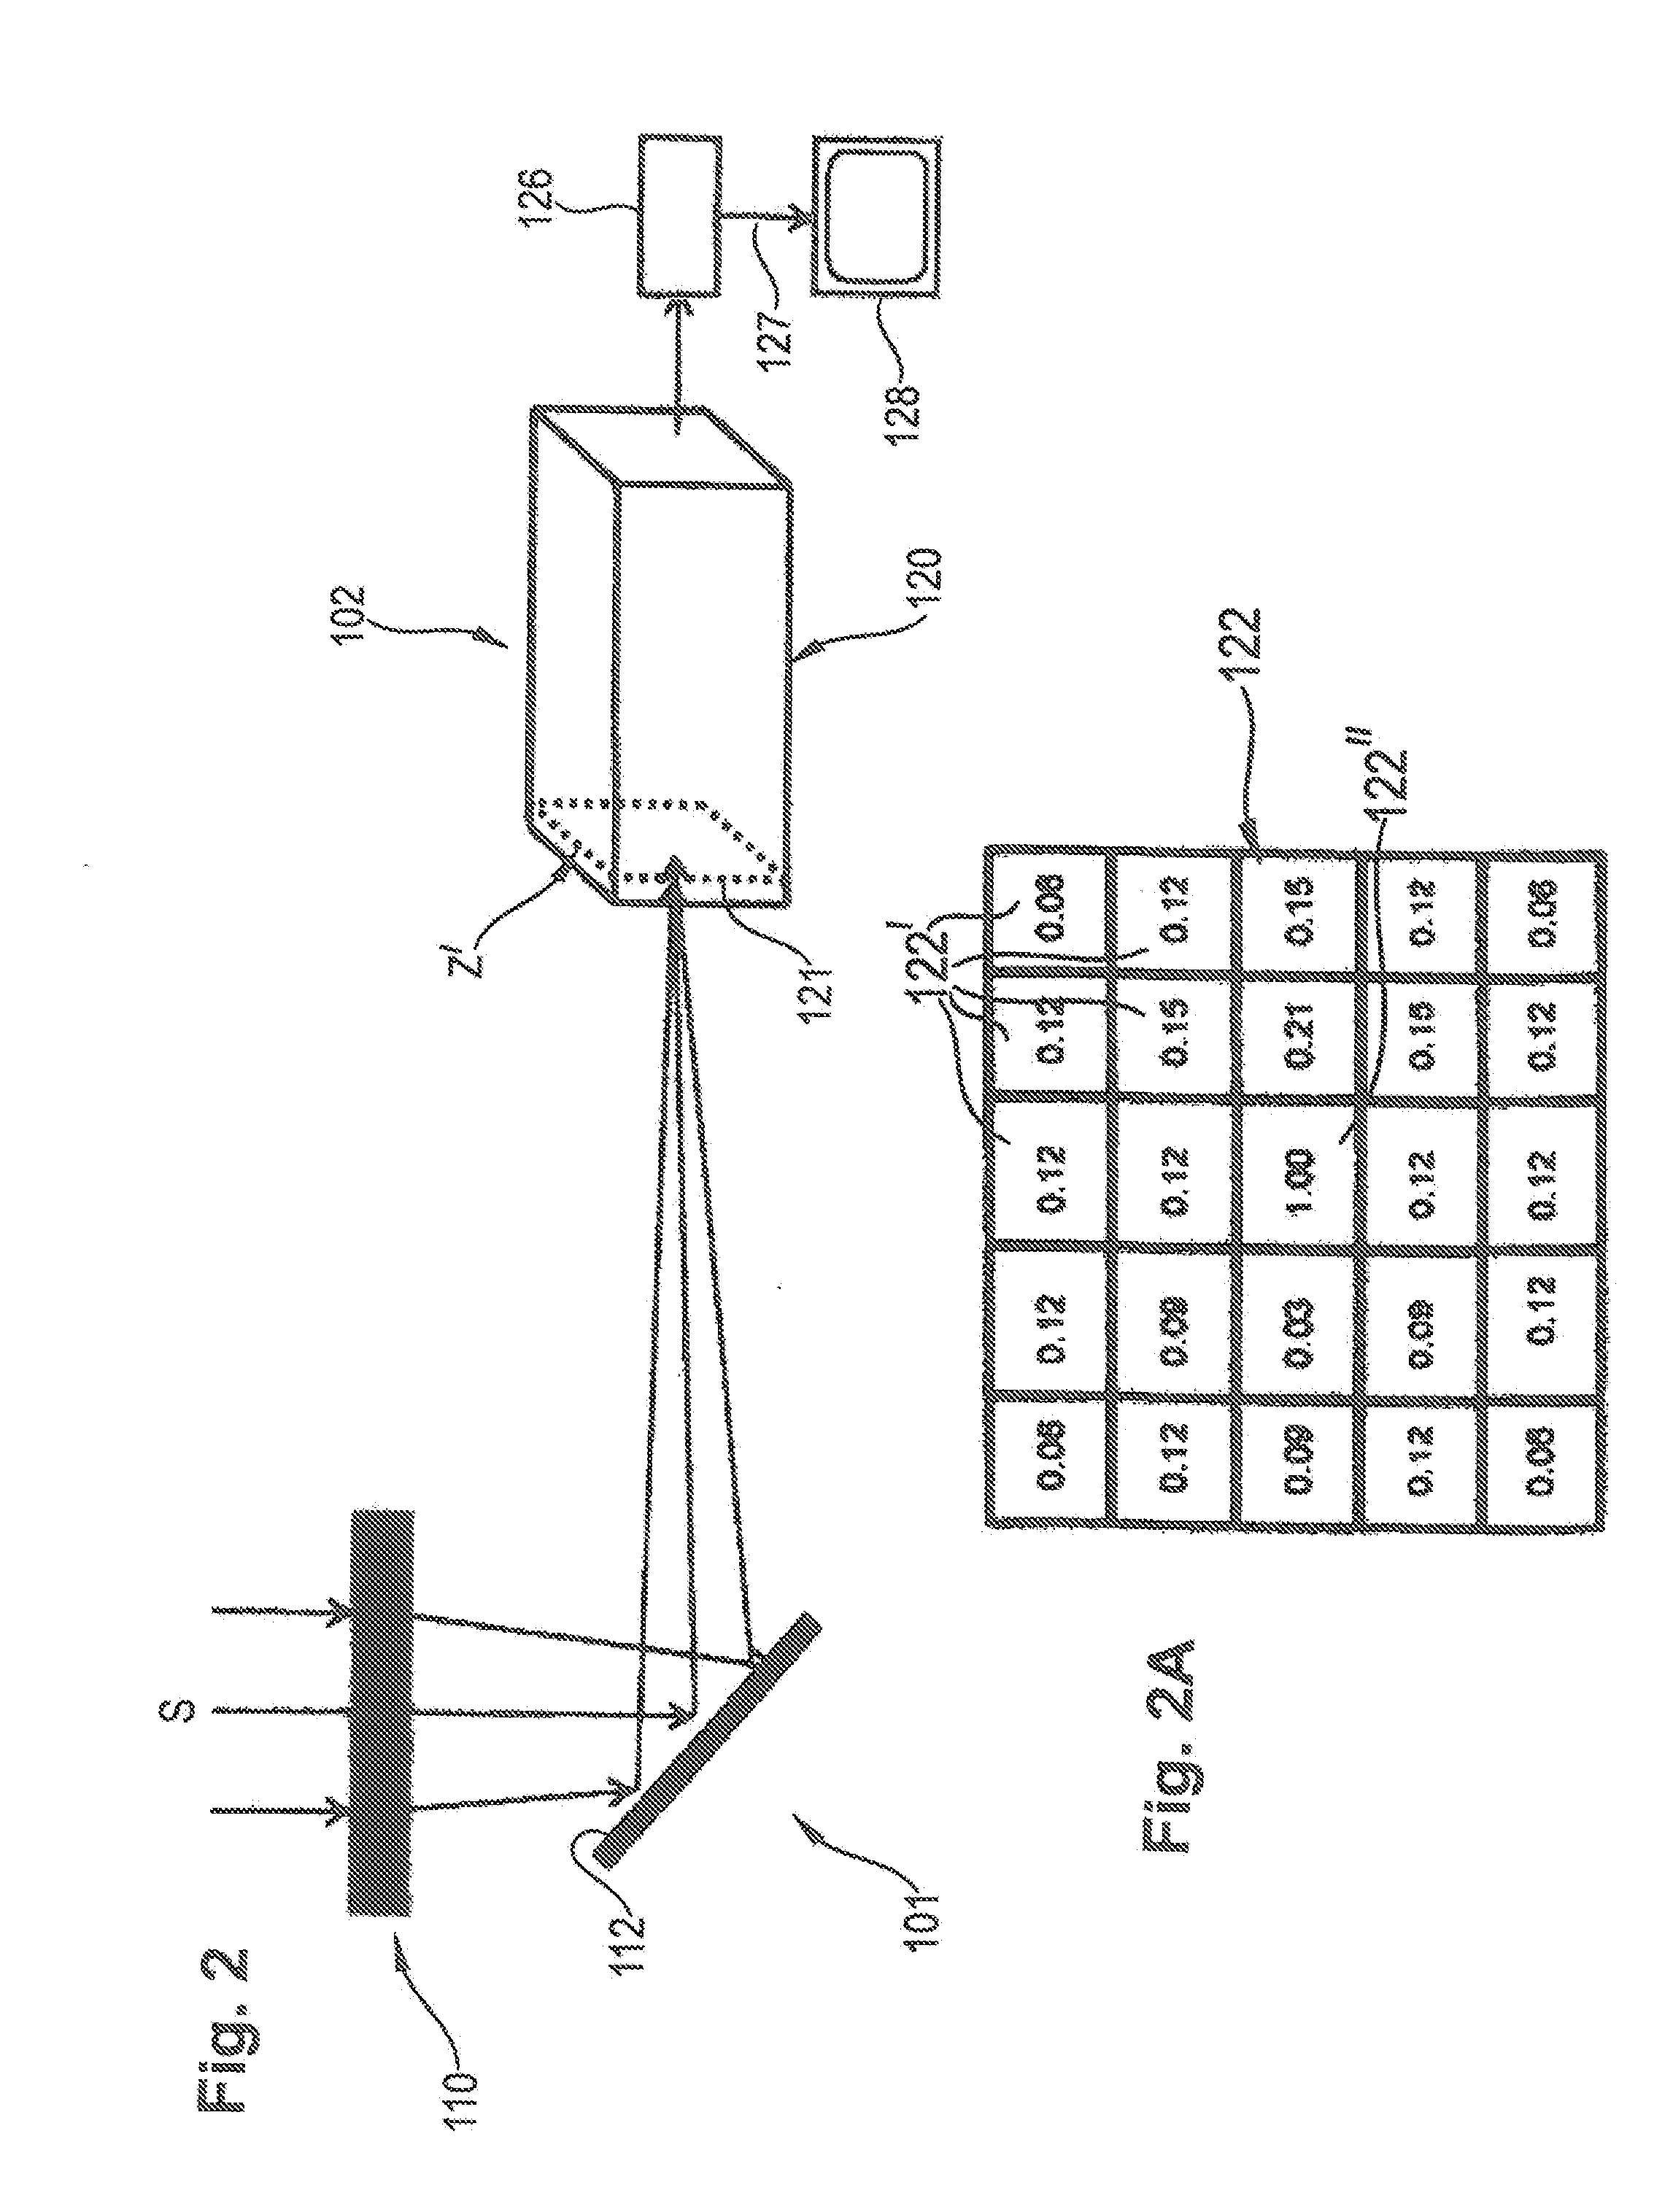 Method for Image Processing and Method that Can be Performed Therewith For the Automatic Detection of Objects, Observation Device and Method for High-Precision Tracking of the Course Followed by Launched Rockets over Large Distances